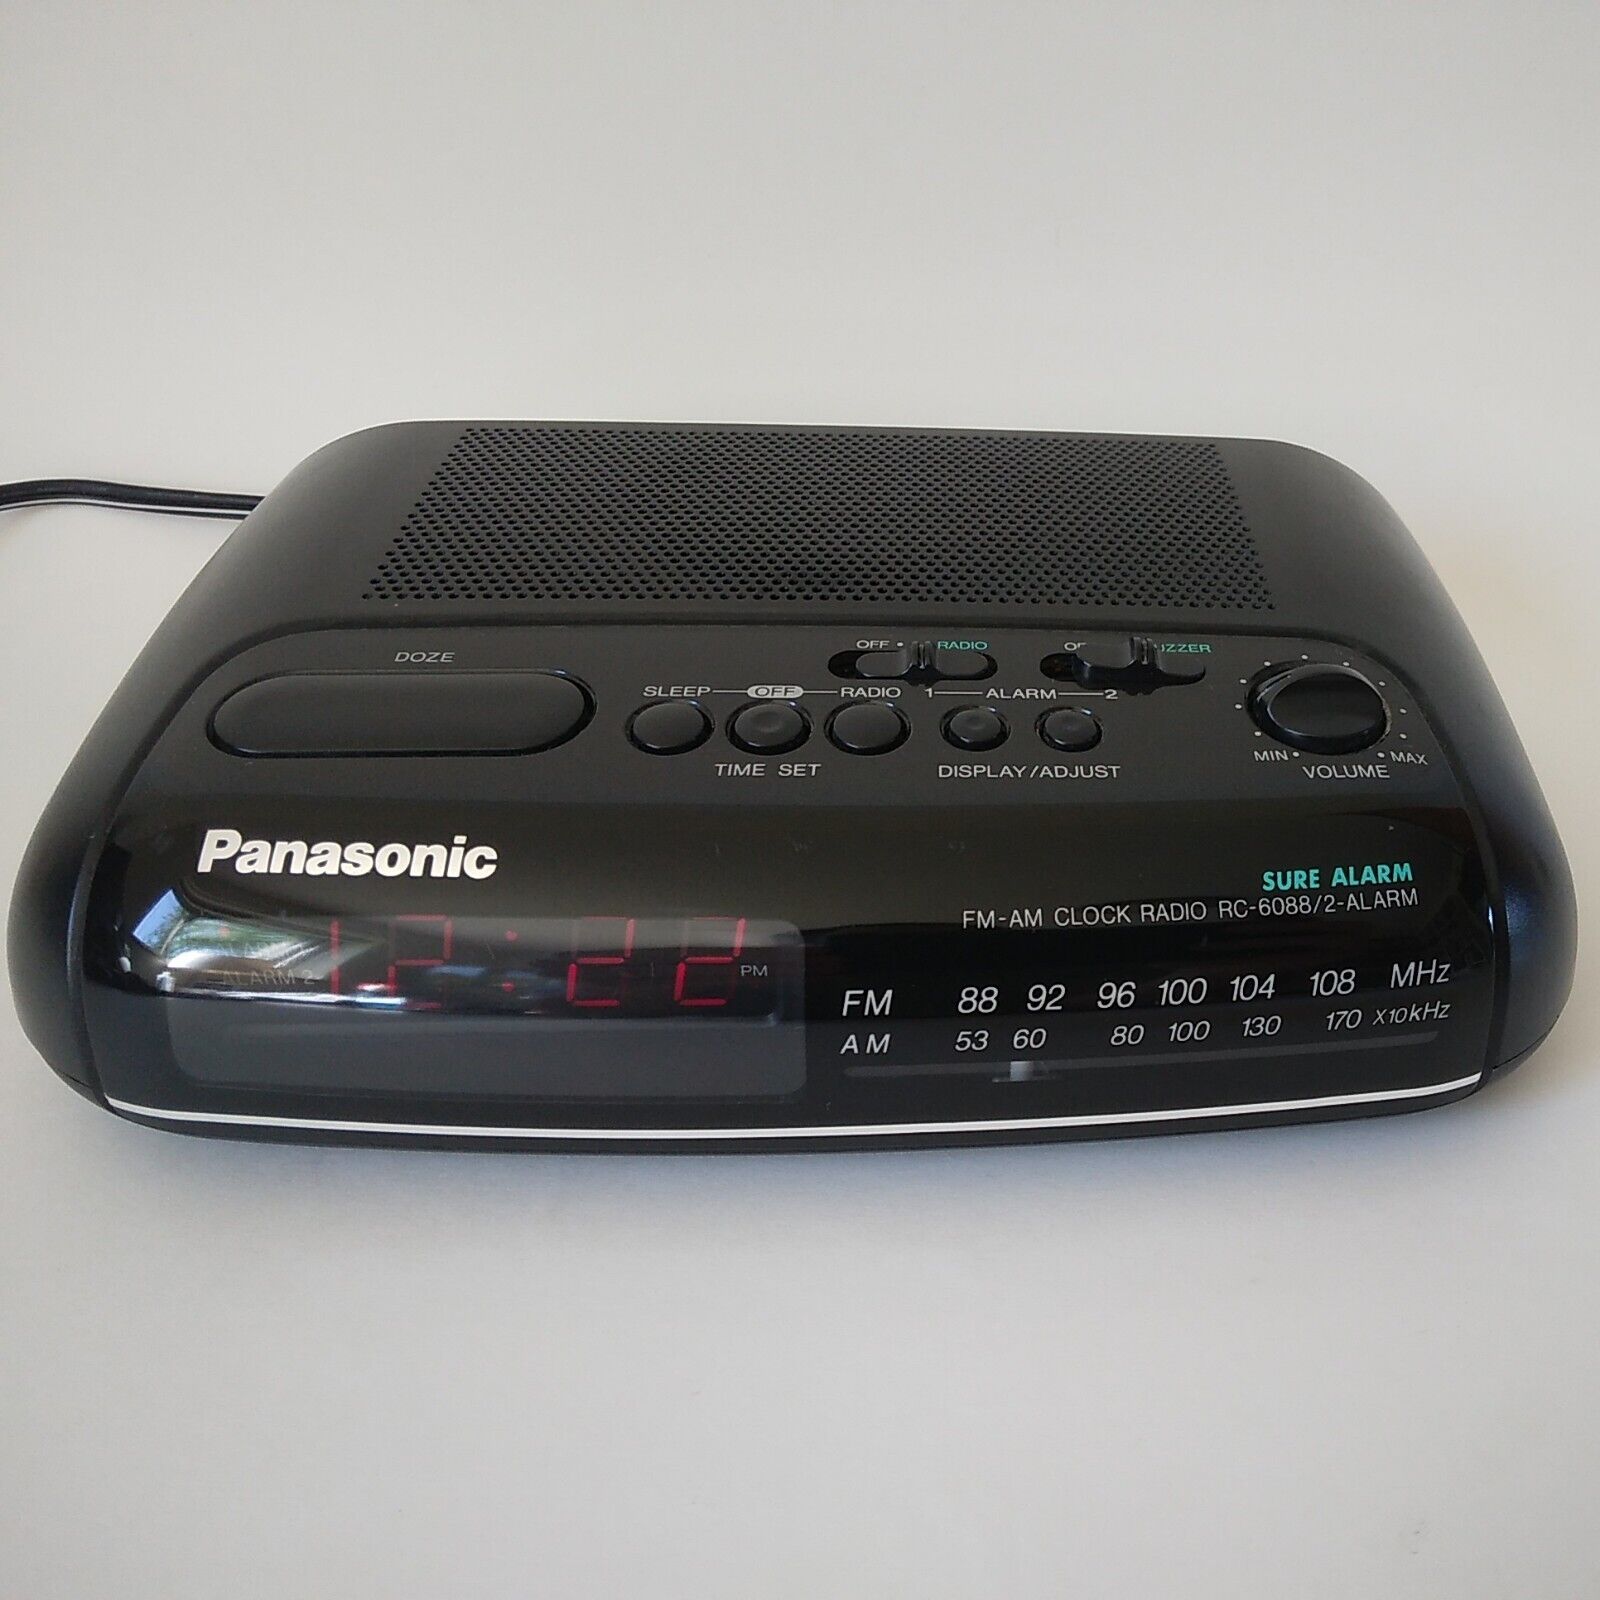 Panasonic RC-6088 Alarm Clock-Red Digits-Dual-AM/FM-Corded-Tested/Works